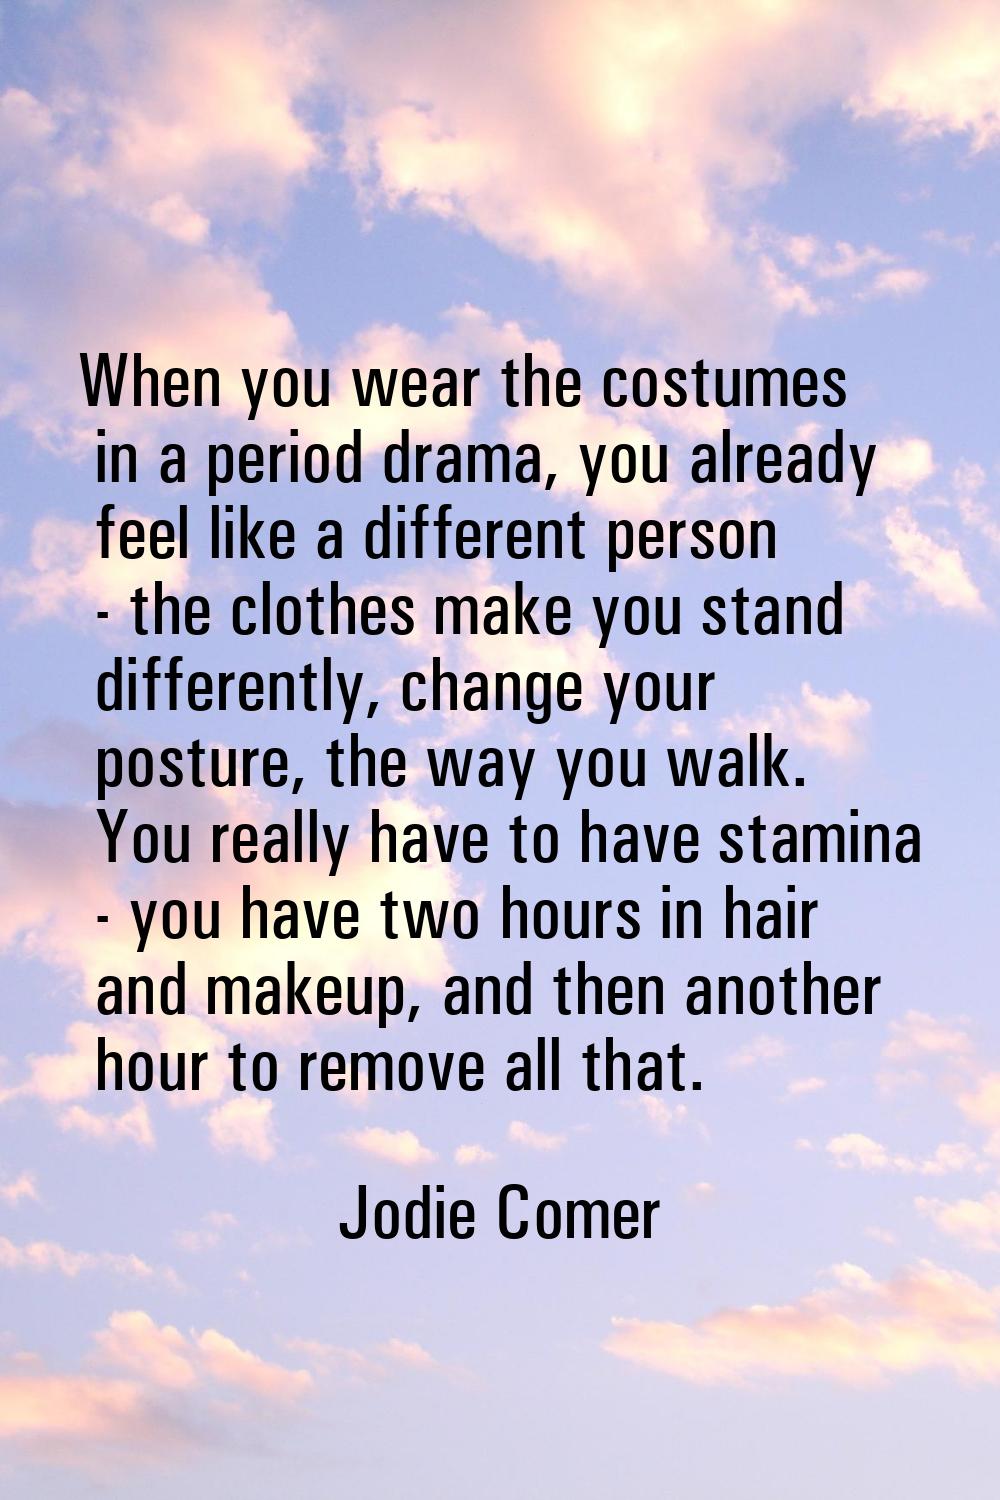 When you wear the costumes in a period drama, you already feel like a different person - the clothe